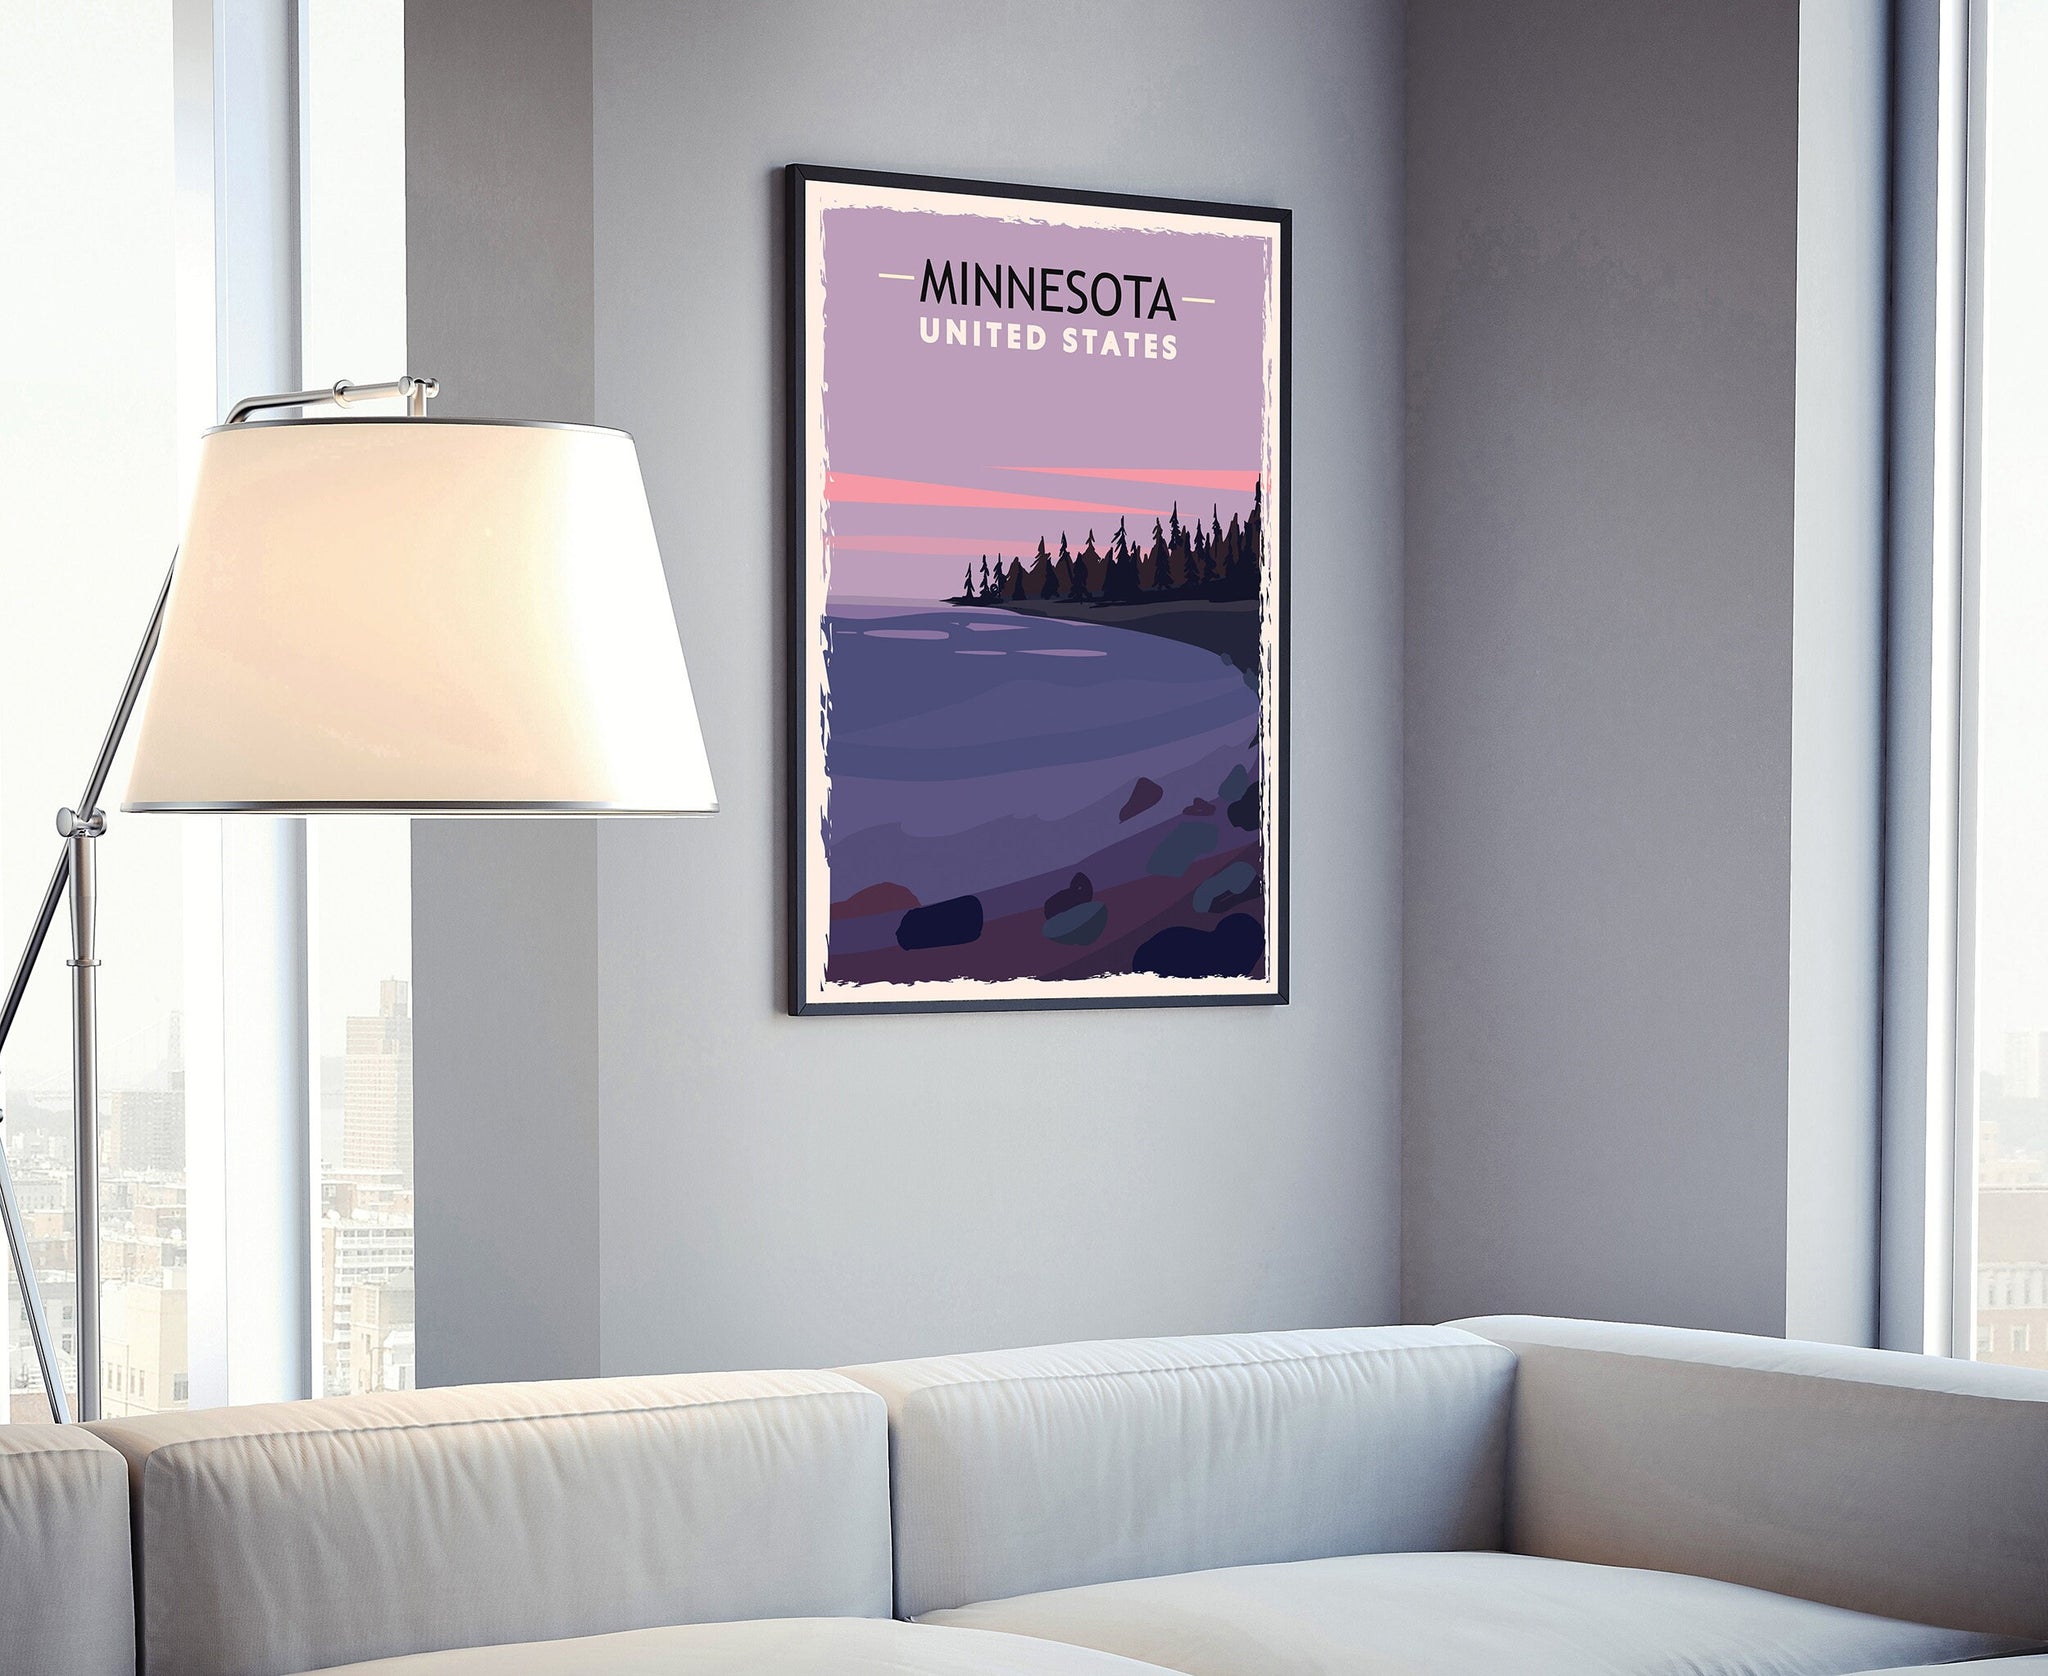 Retro Style Travel Poster, Minnesota Vintage Rustic Poster Print, Home Wall Art, Office Wall Decor, Posters, Minnesota, State Map Poster